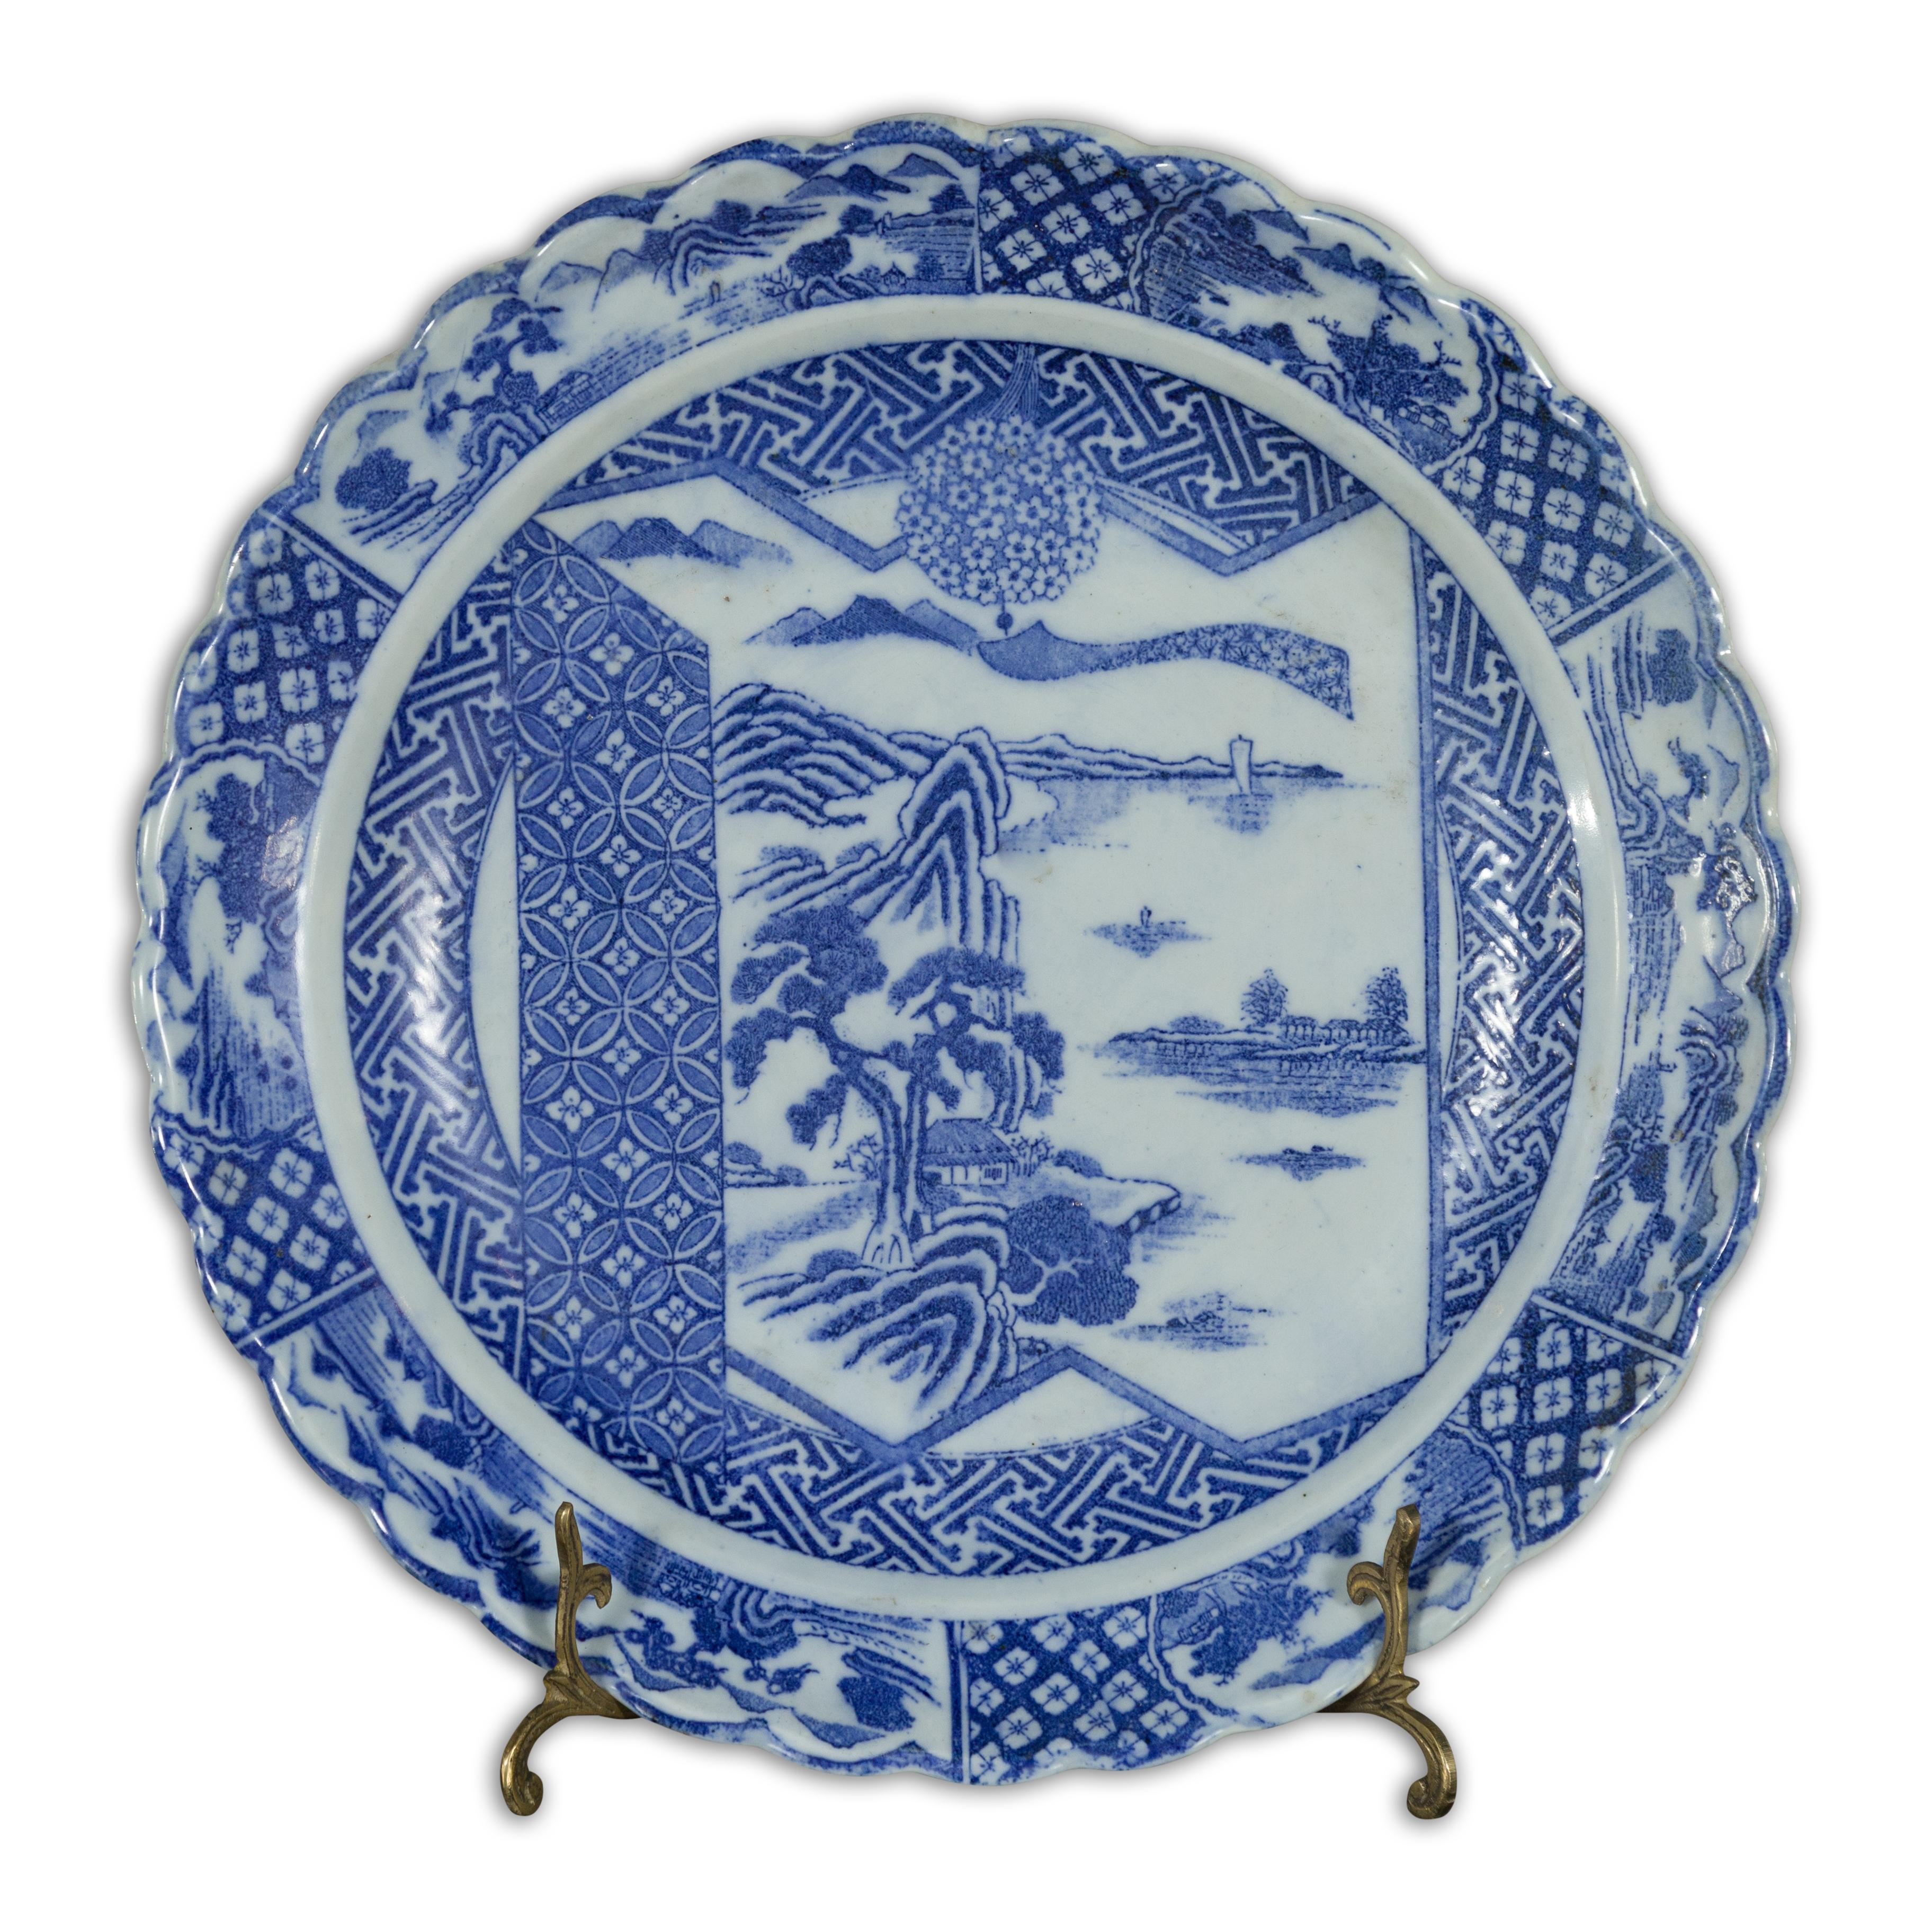 Japanese 19th Century Blue and White Porcelain Plate with Landscapes and Flowers For Sale 14